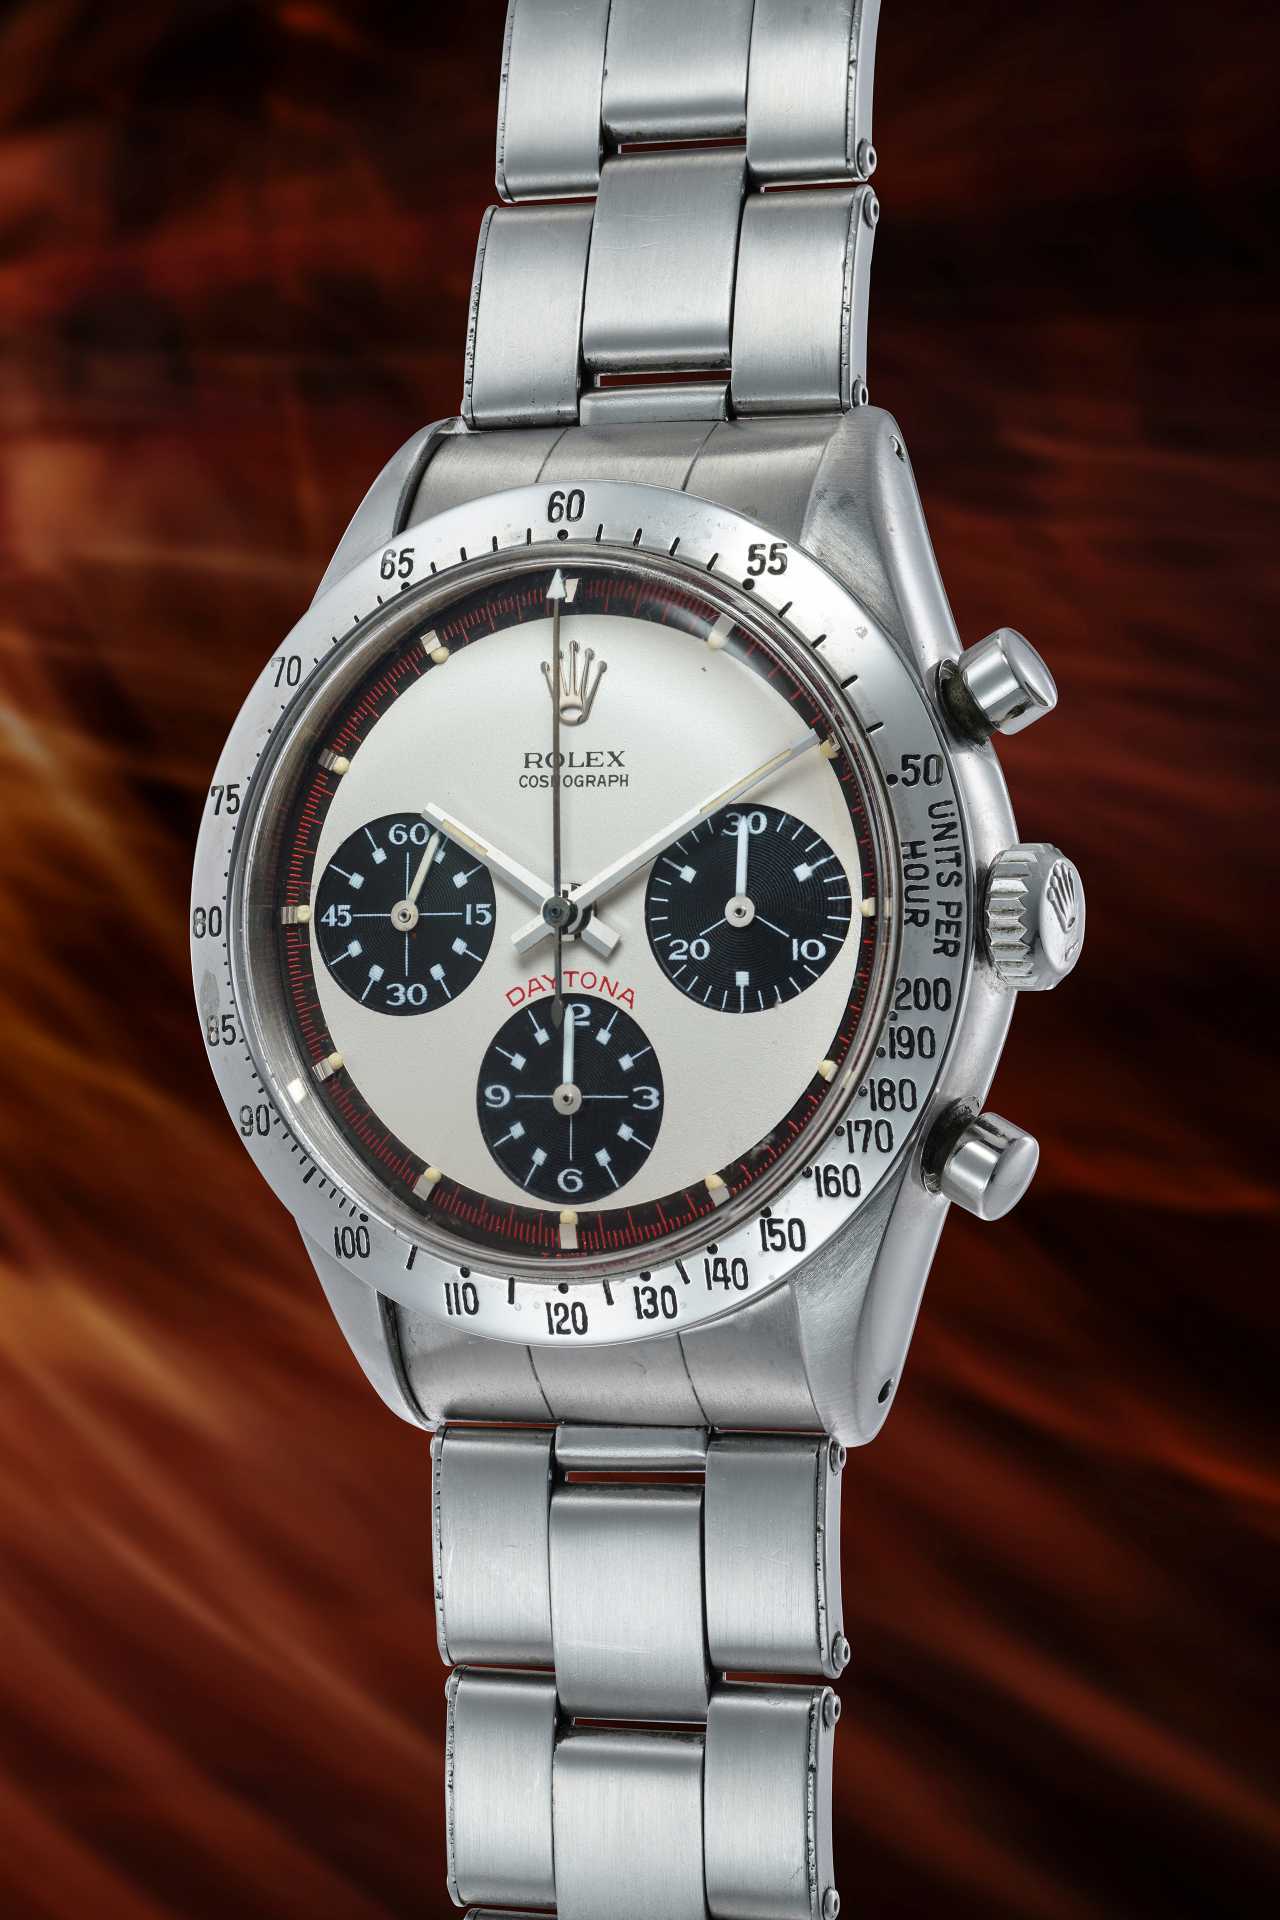 Rolex Reference 6239 ‘Paul Newman’